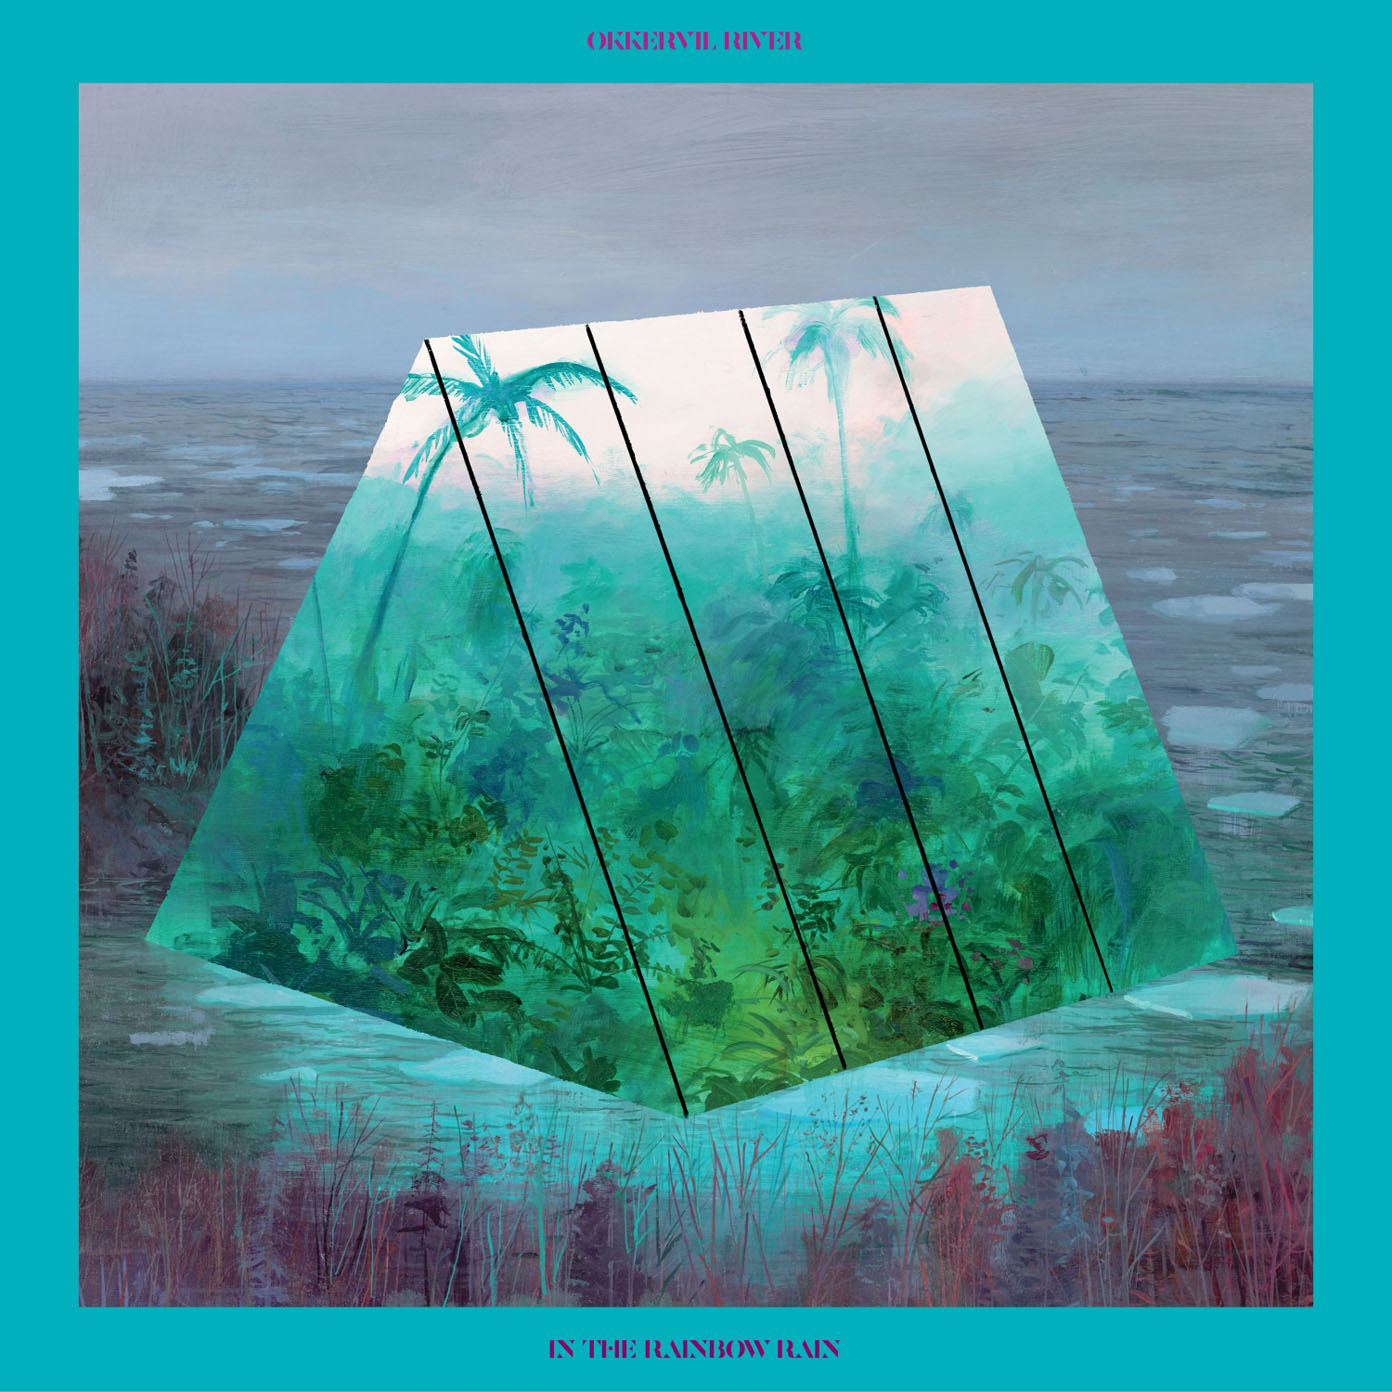 In the Rainbow Rain by Okkervil River